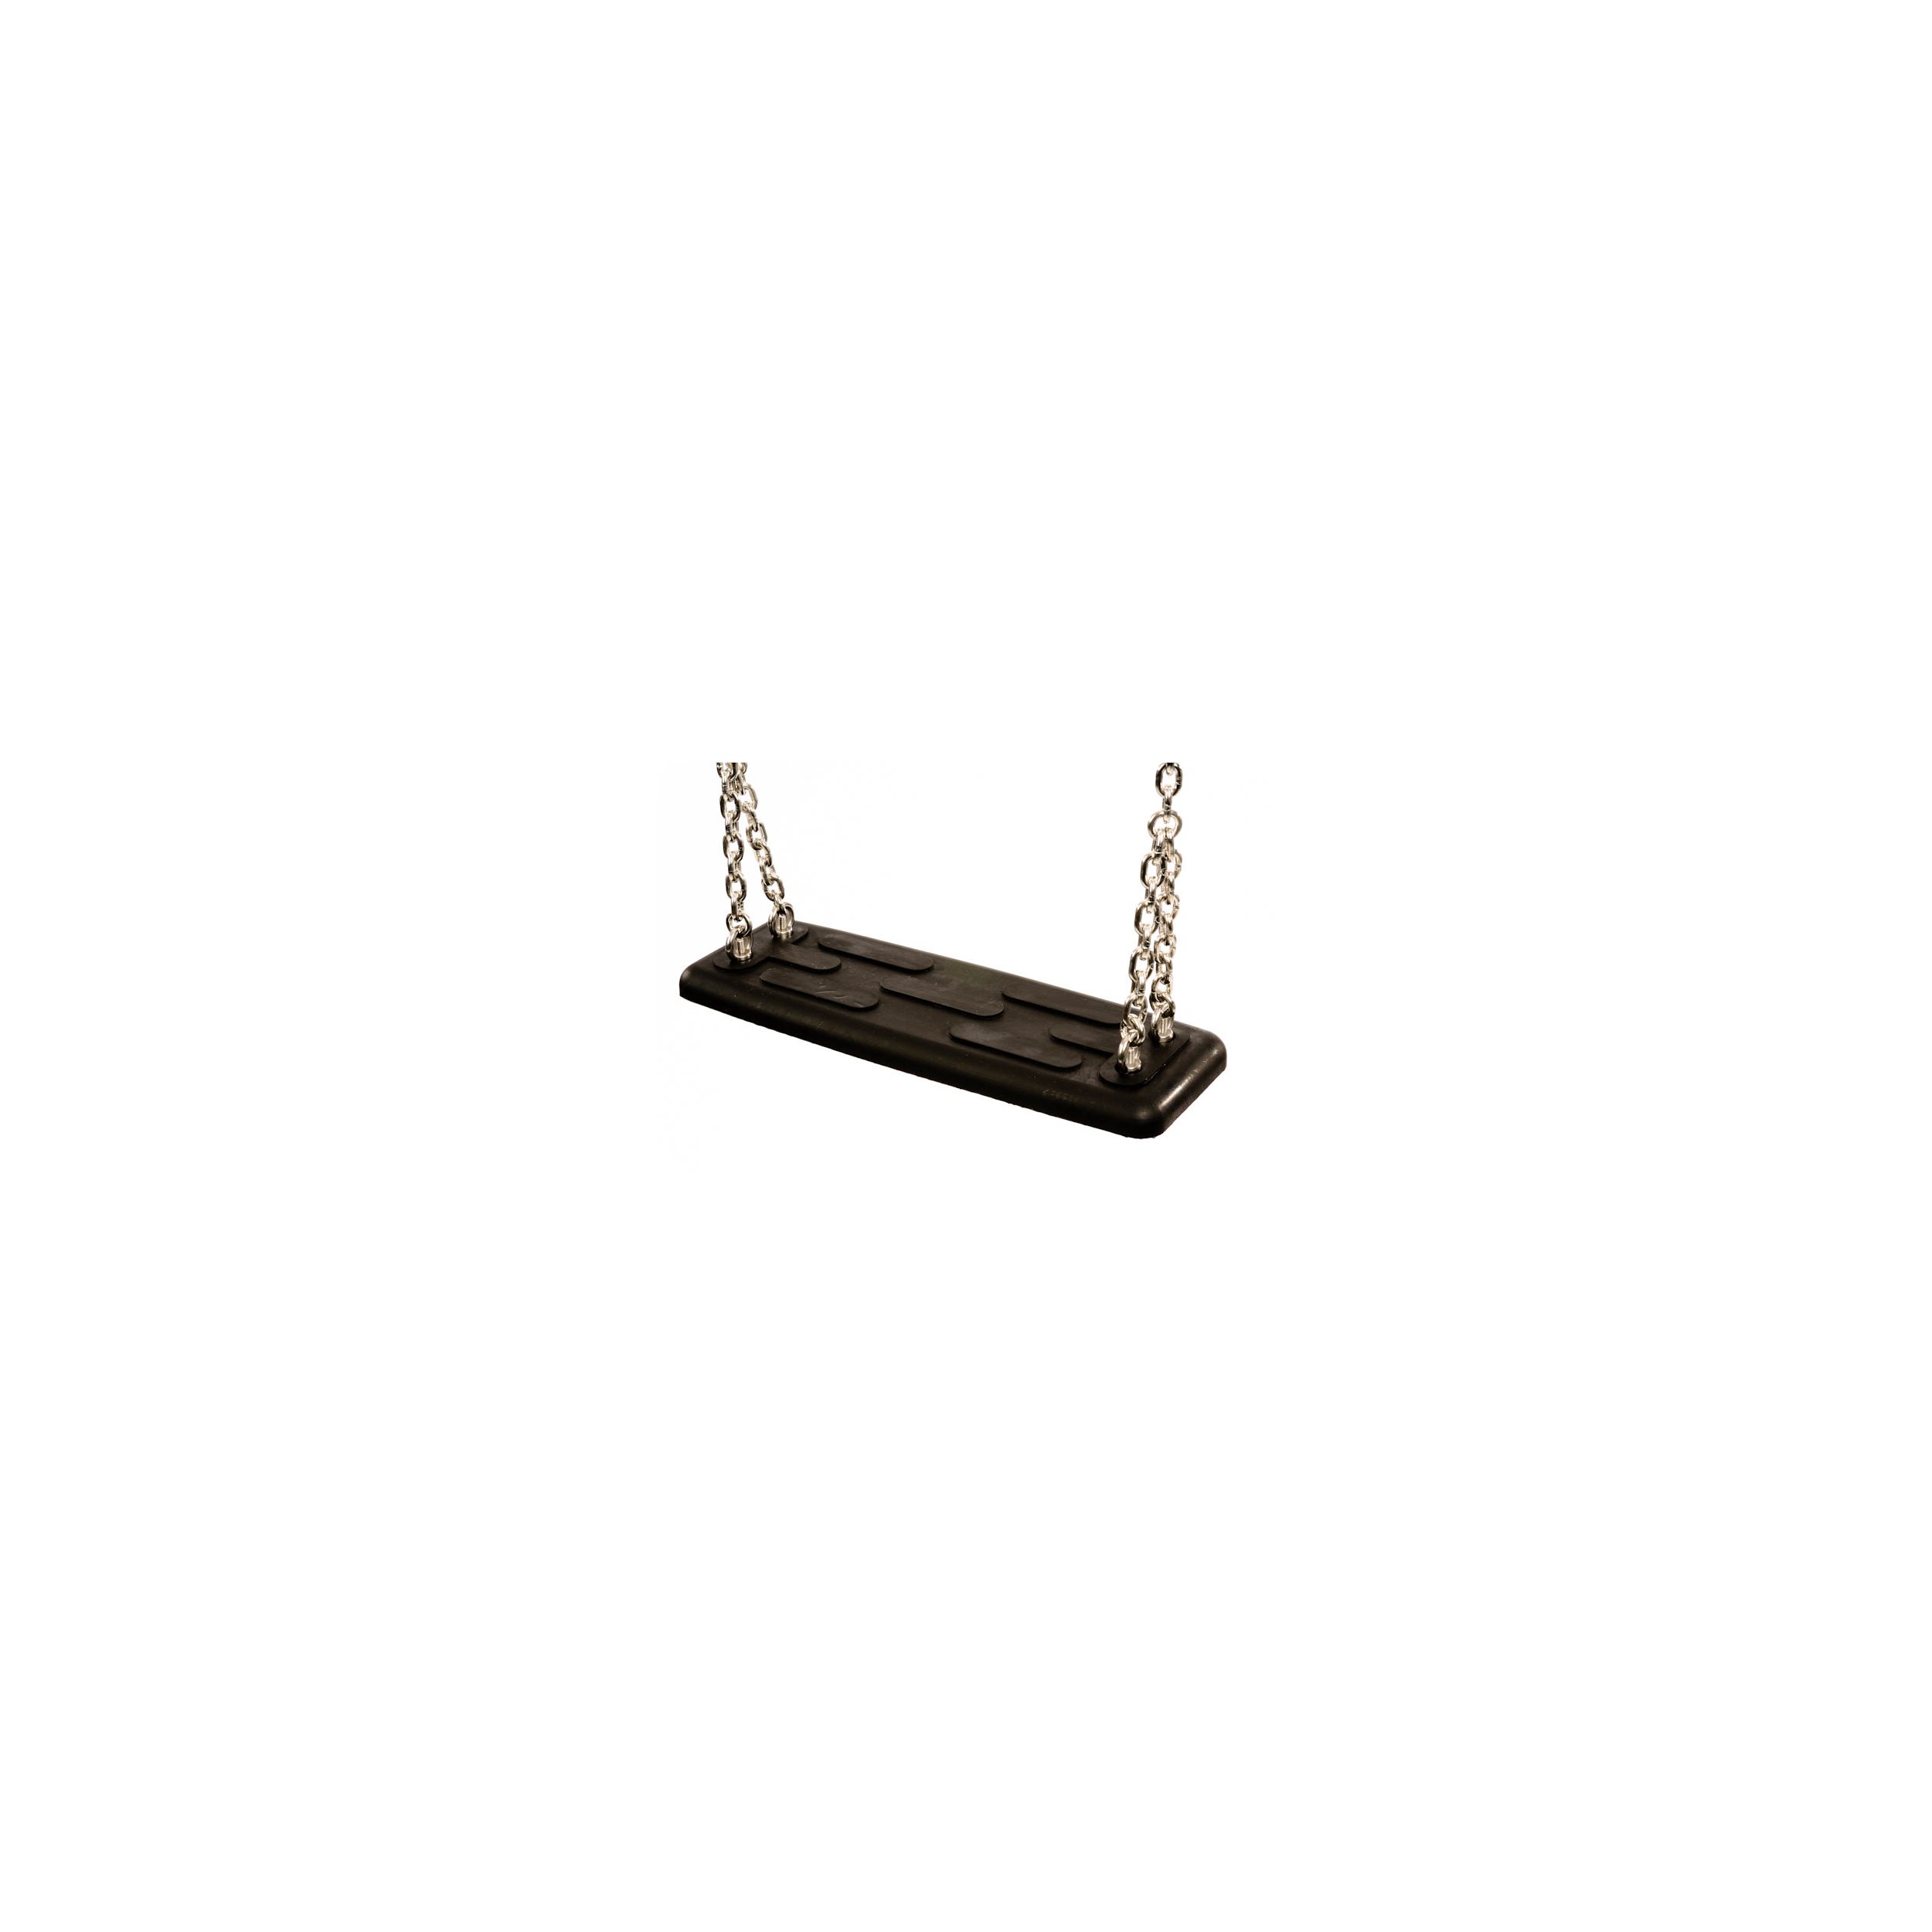 Commercial safety rubber swing seat type 1A black Hot-dip galvanised 200 cm